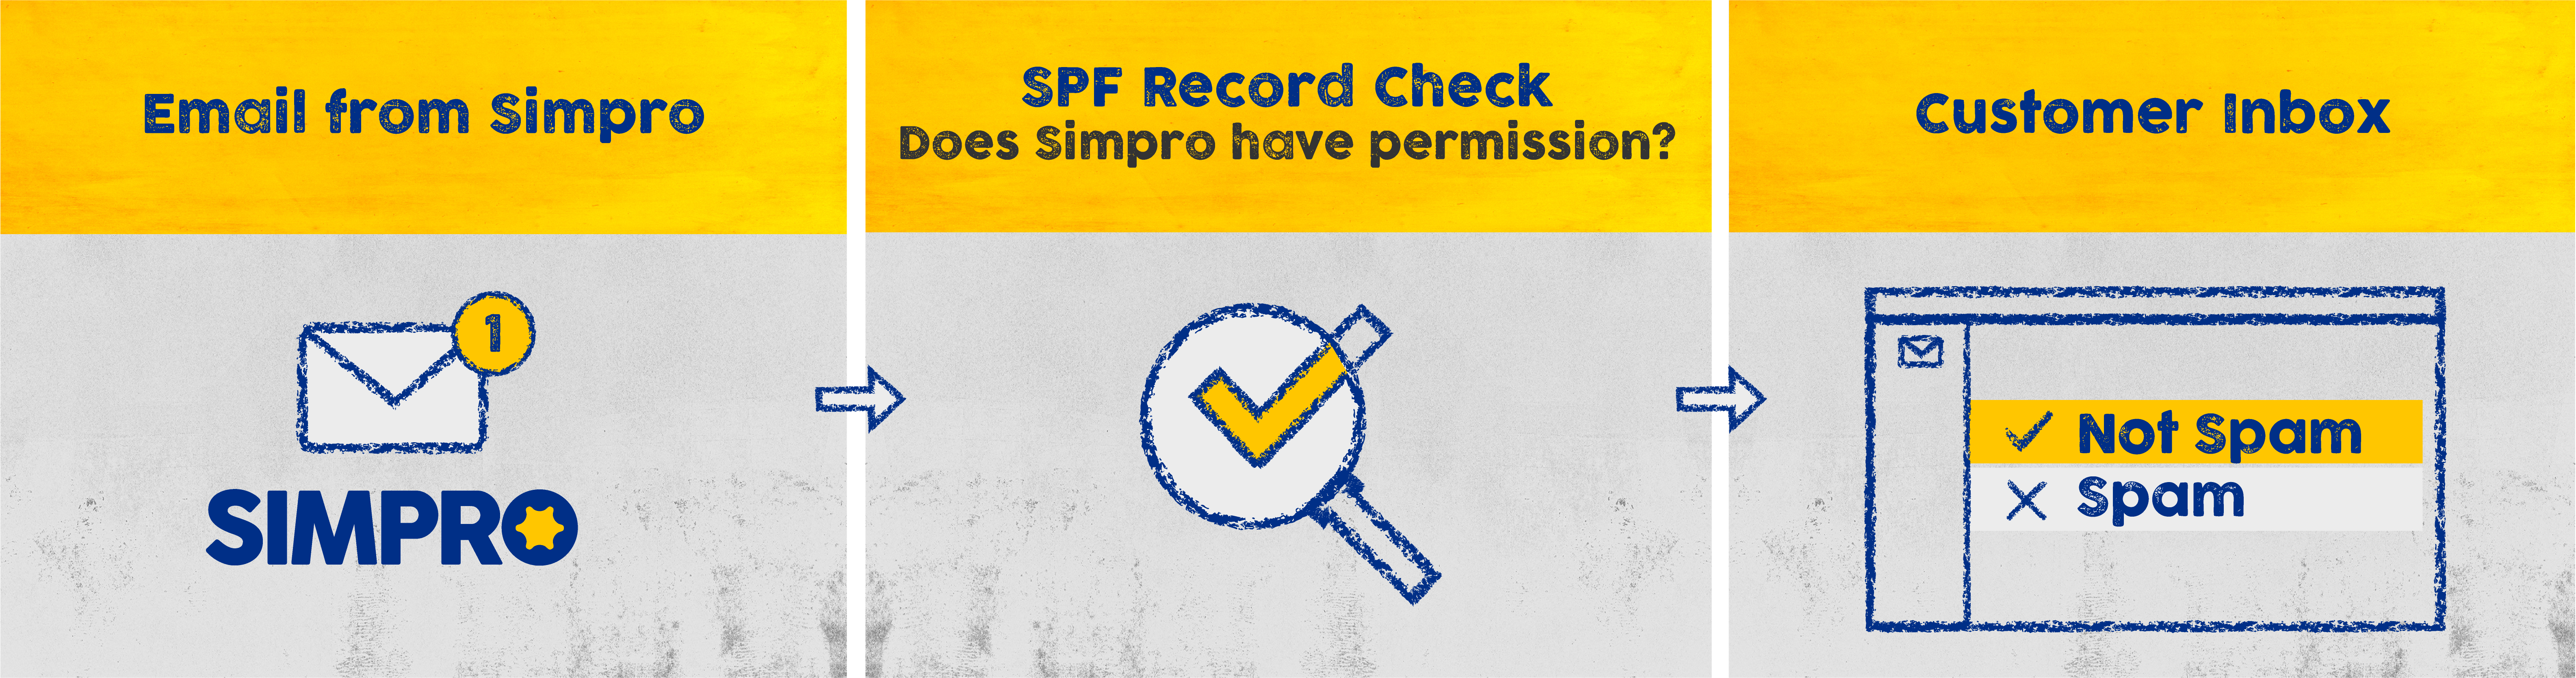 A graphic displaying the process of an SPF record check.